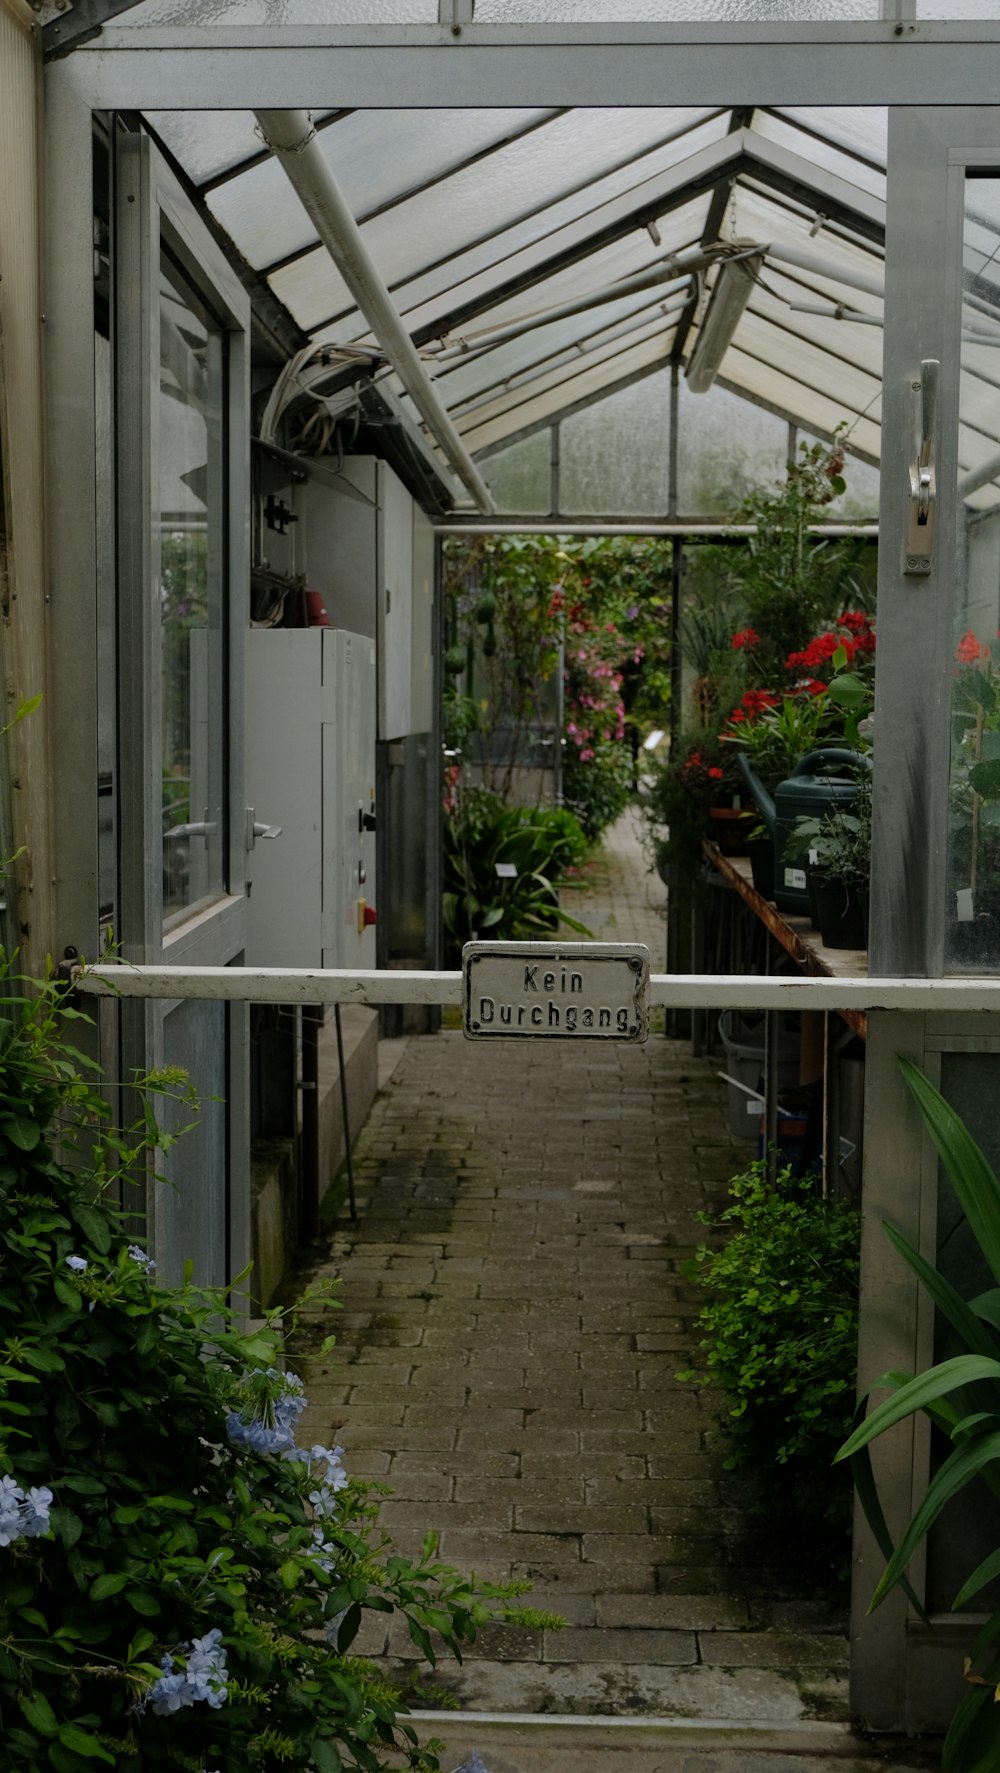 a greenhouse with a sign in the middle of it